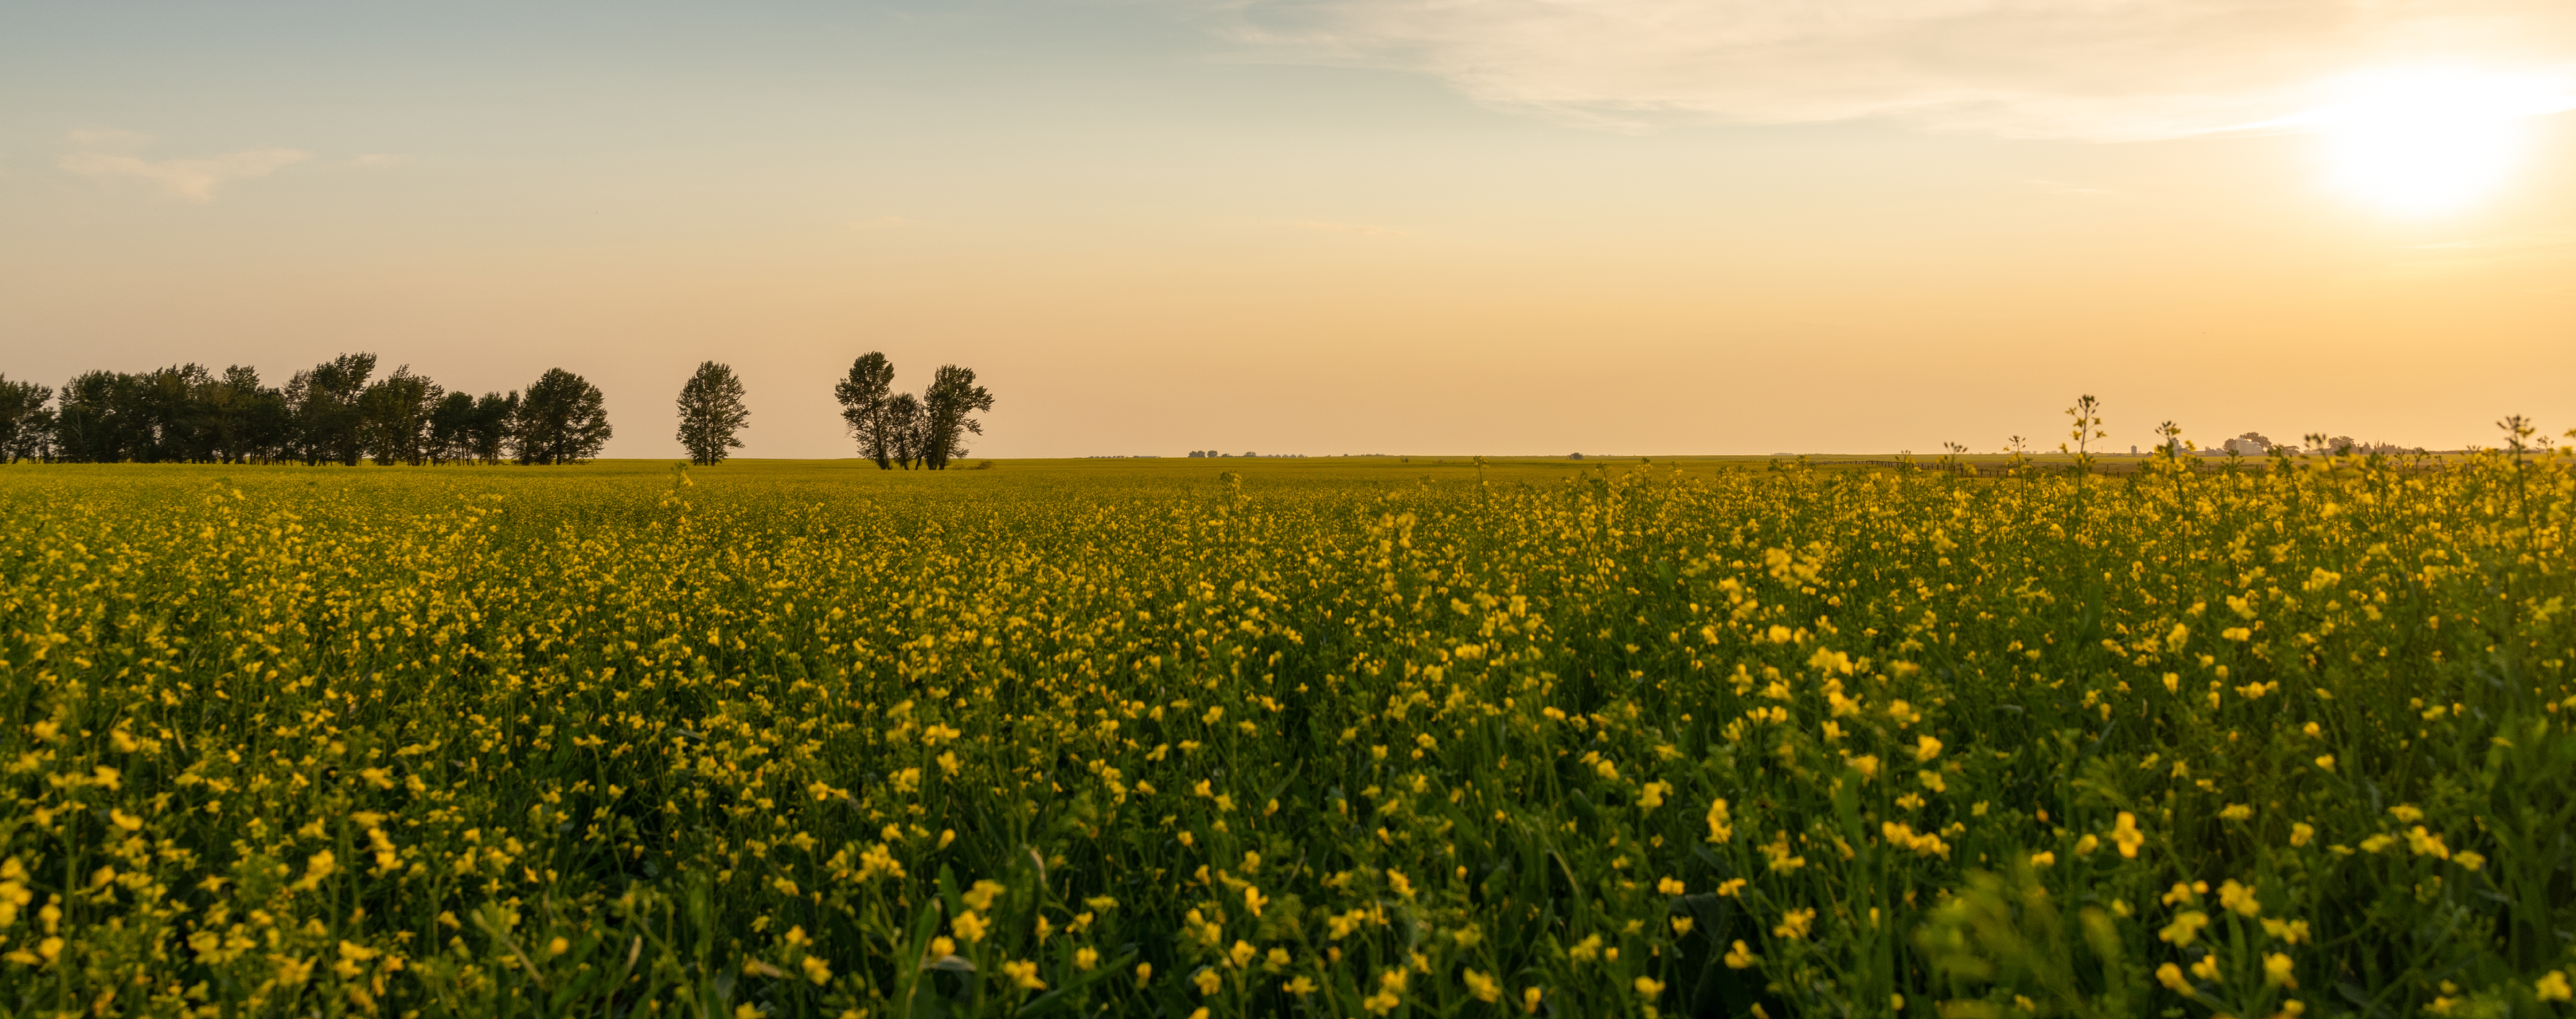 Canola field with sunset